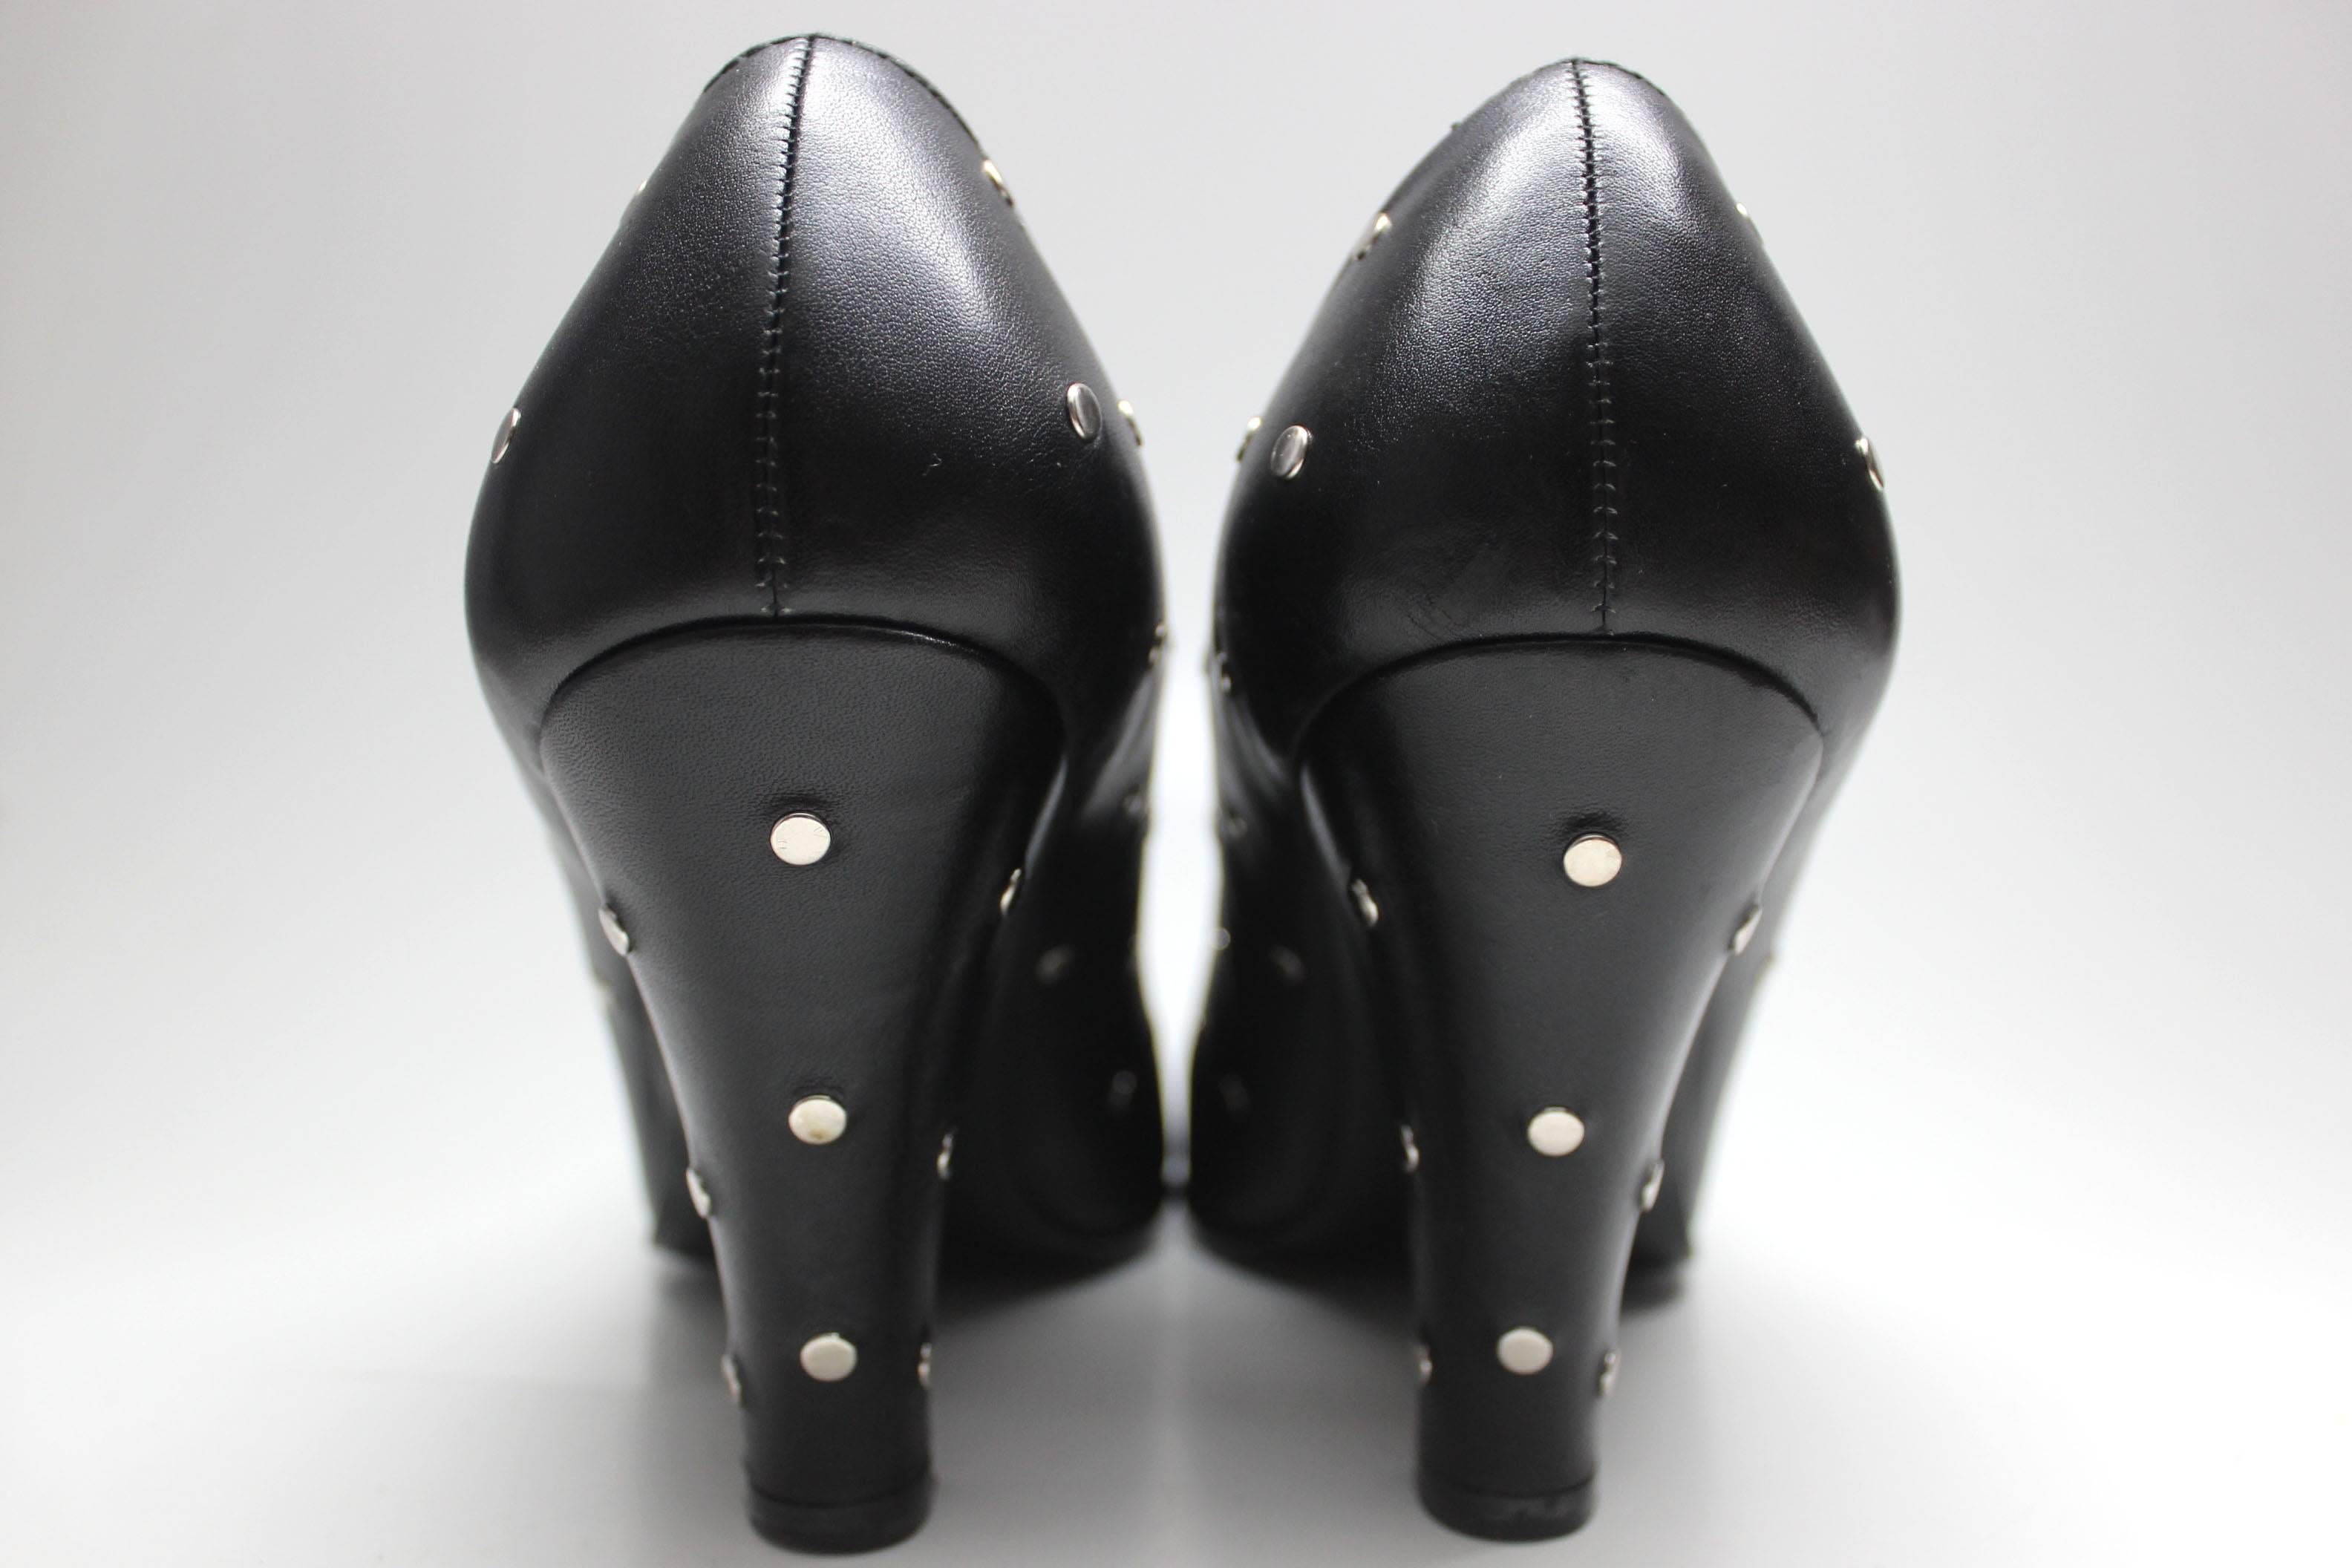 Sexy and playful, these heels are both punk and polished. Leather upper, silver dot studs throughout. Look especially great from the back with the studs on the heels! Round toe. 

Made in Spain
US Size 8